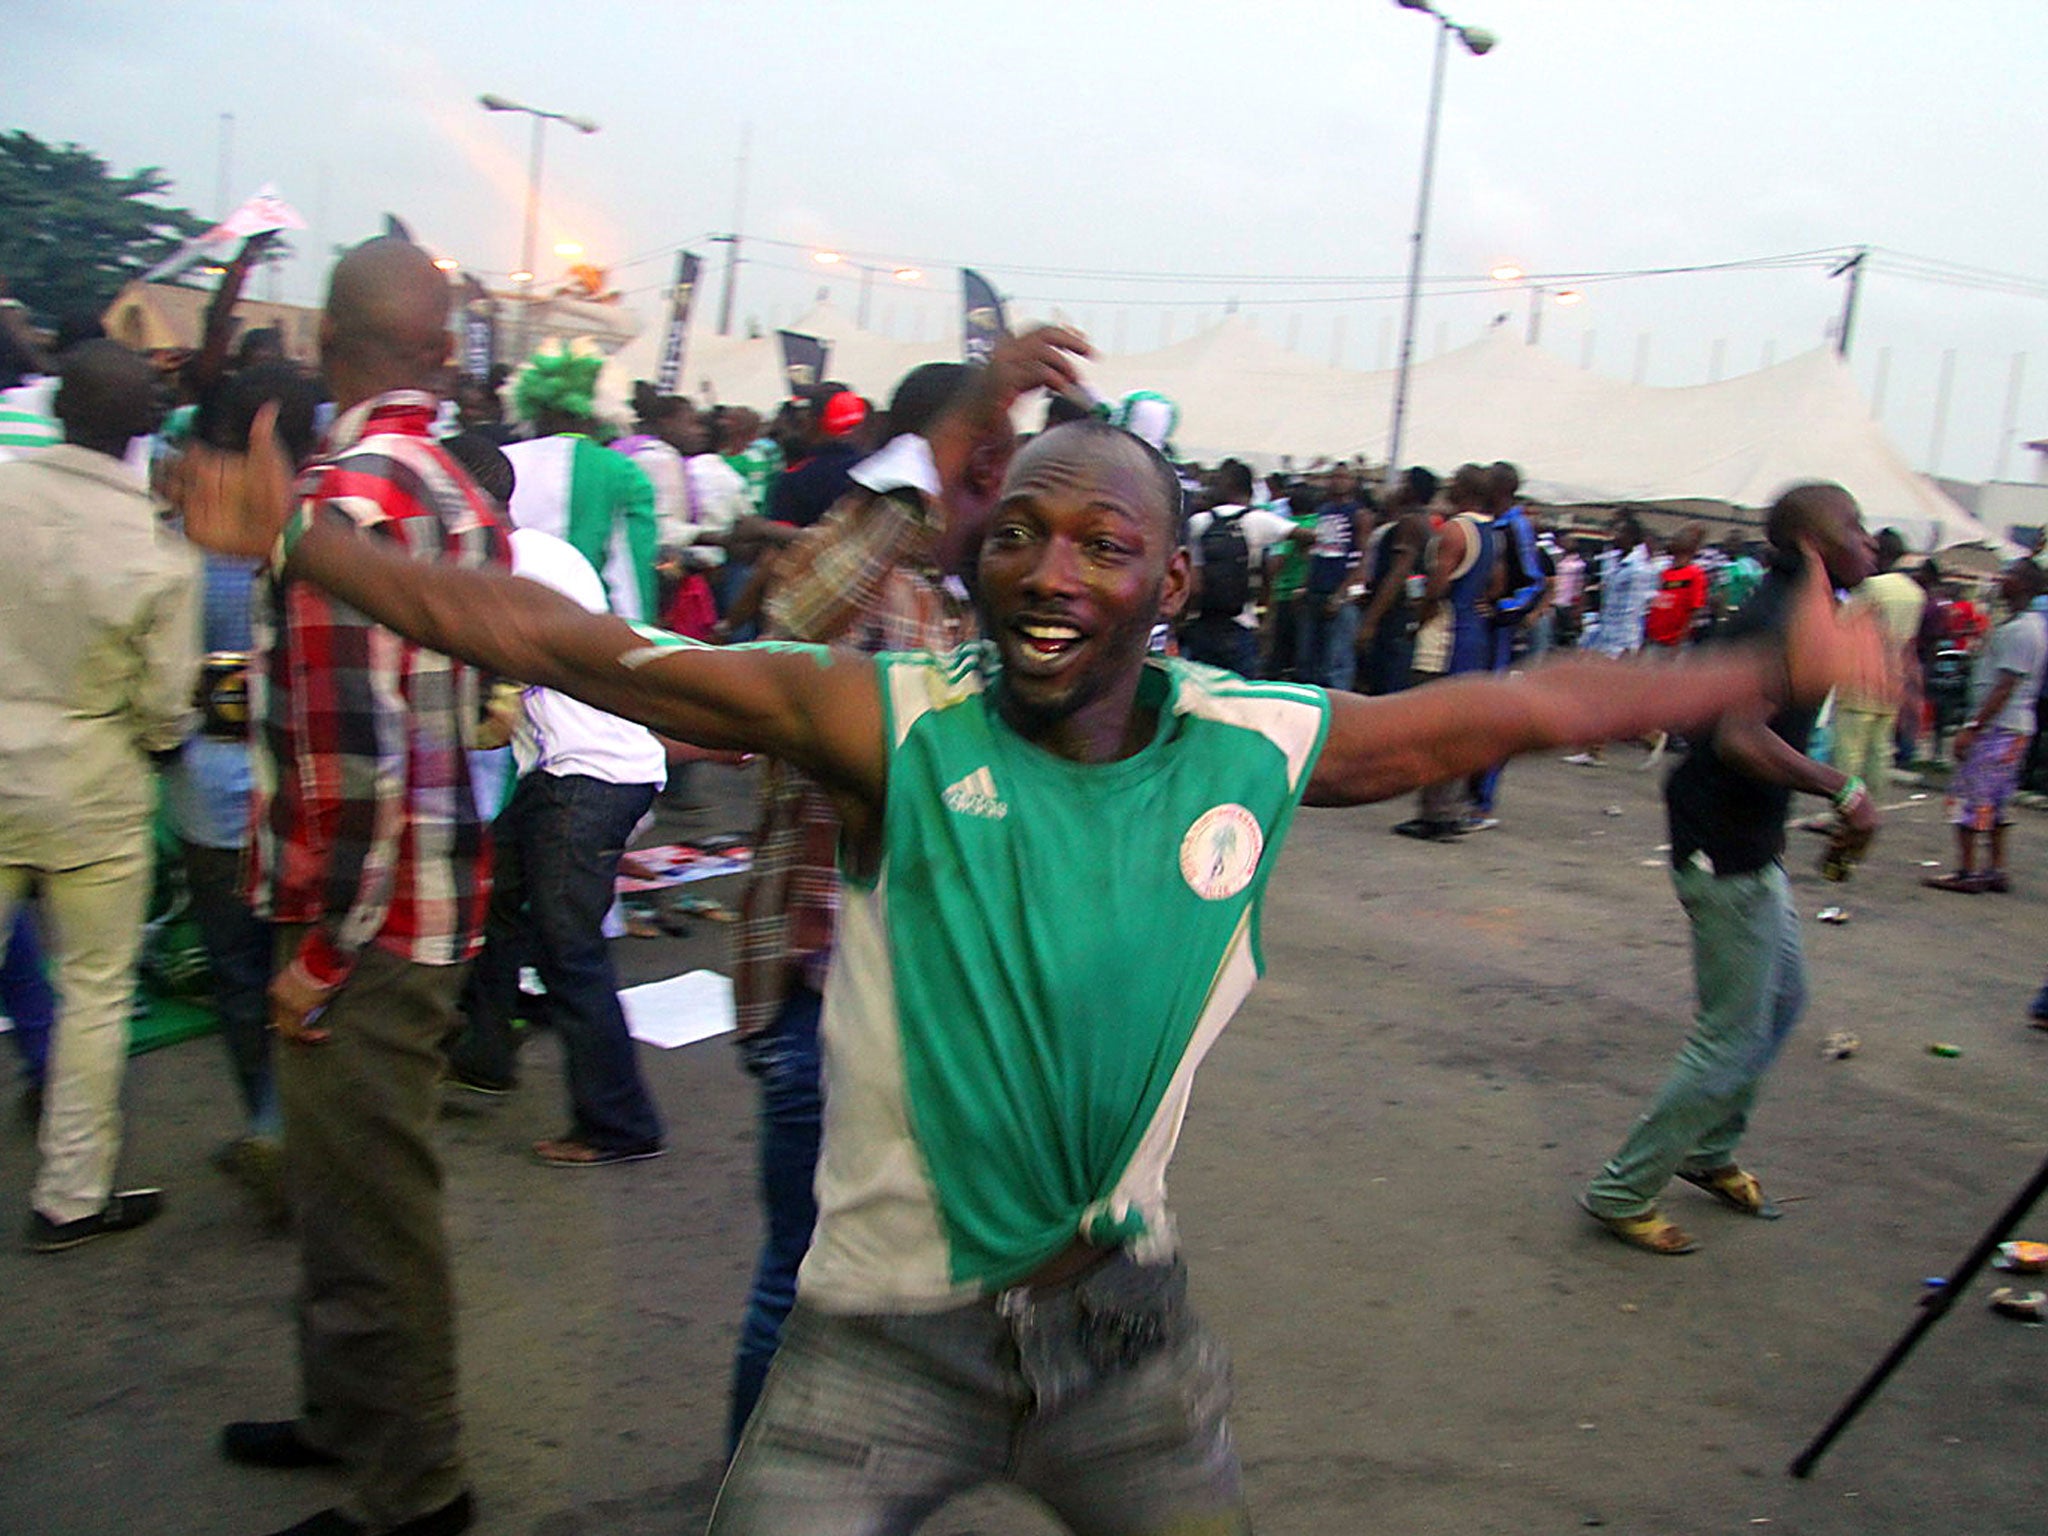 Nigerian fans celebrate at a screening at the Teslim Balogun Stadium in the Surulere area of Lagos ahead of the 2013 African Cup of Nations final football match between Nigeria and Burkina Faso